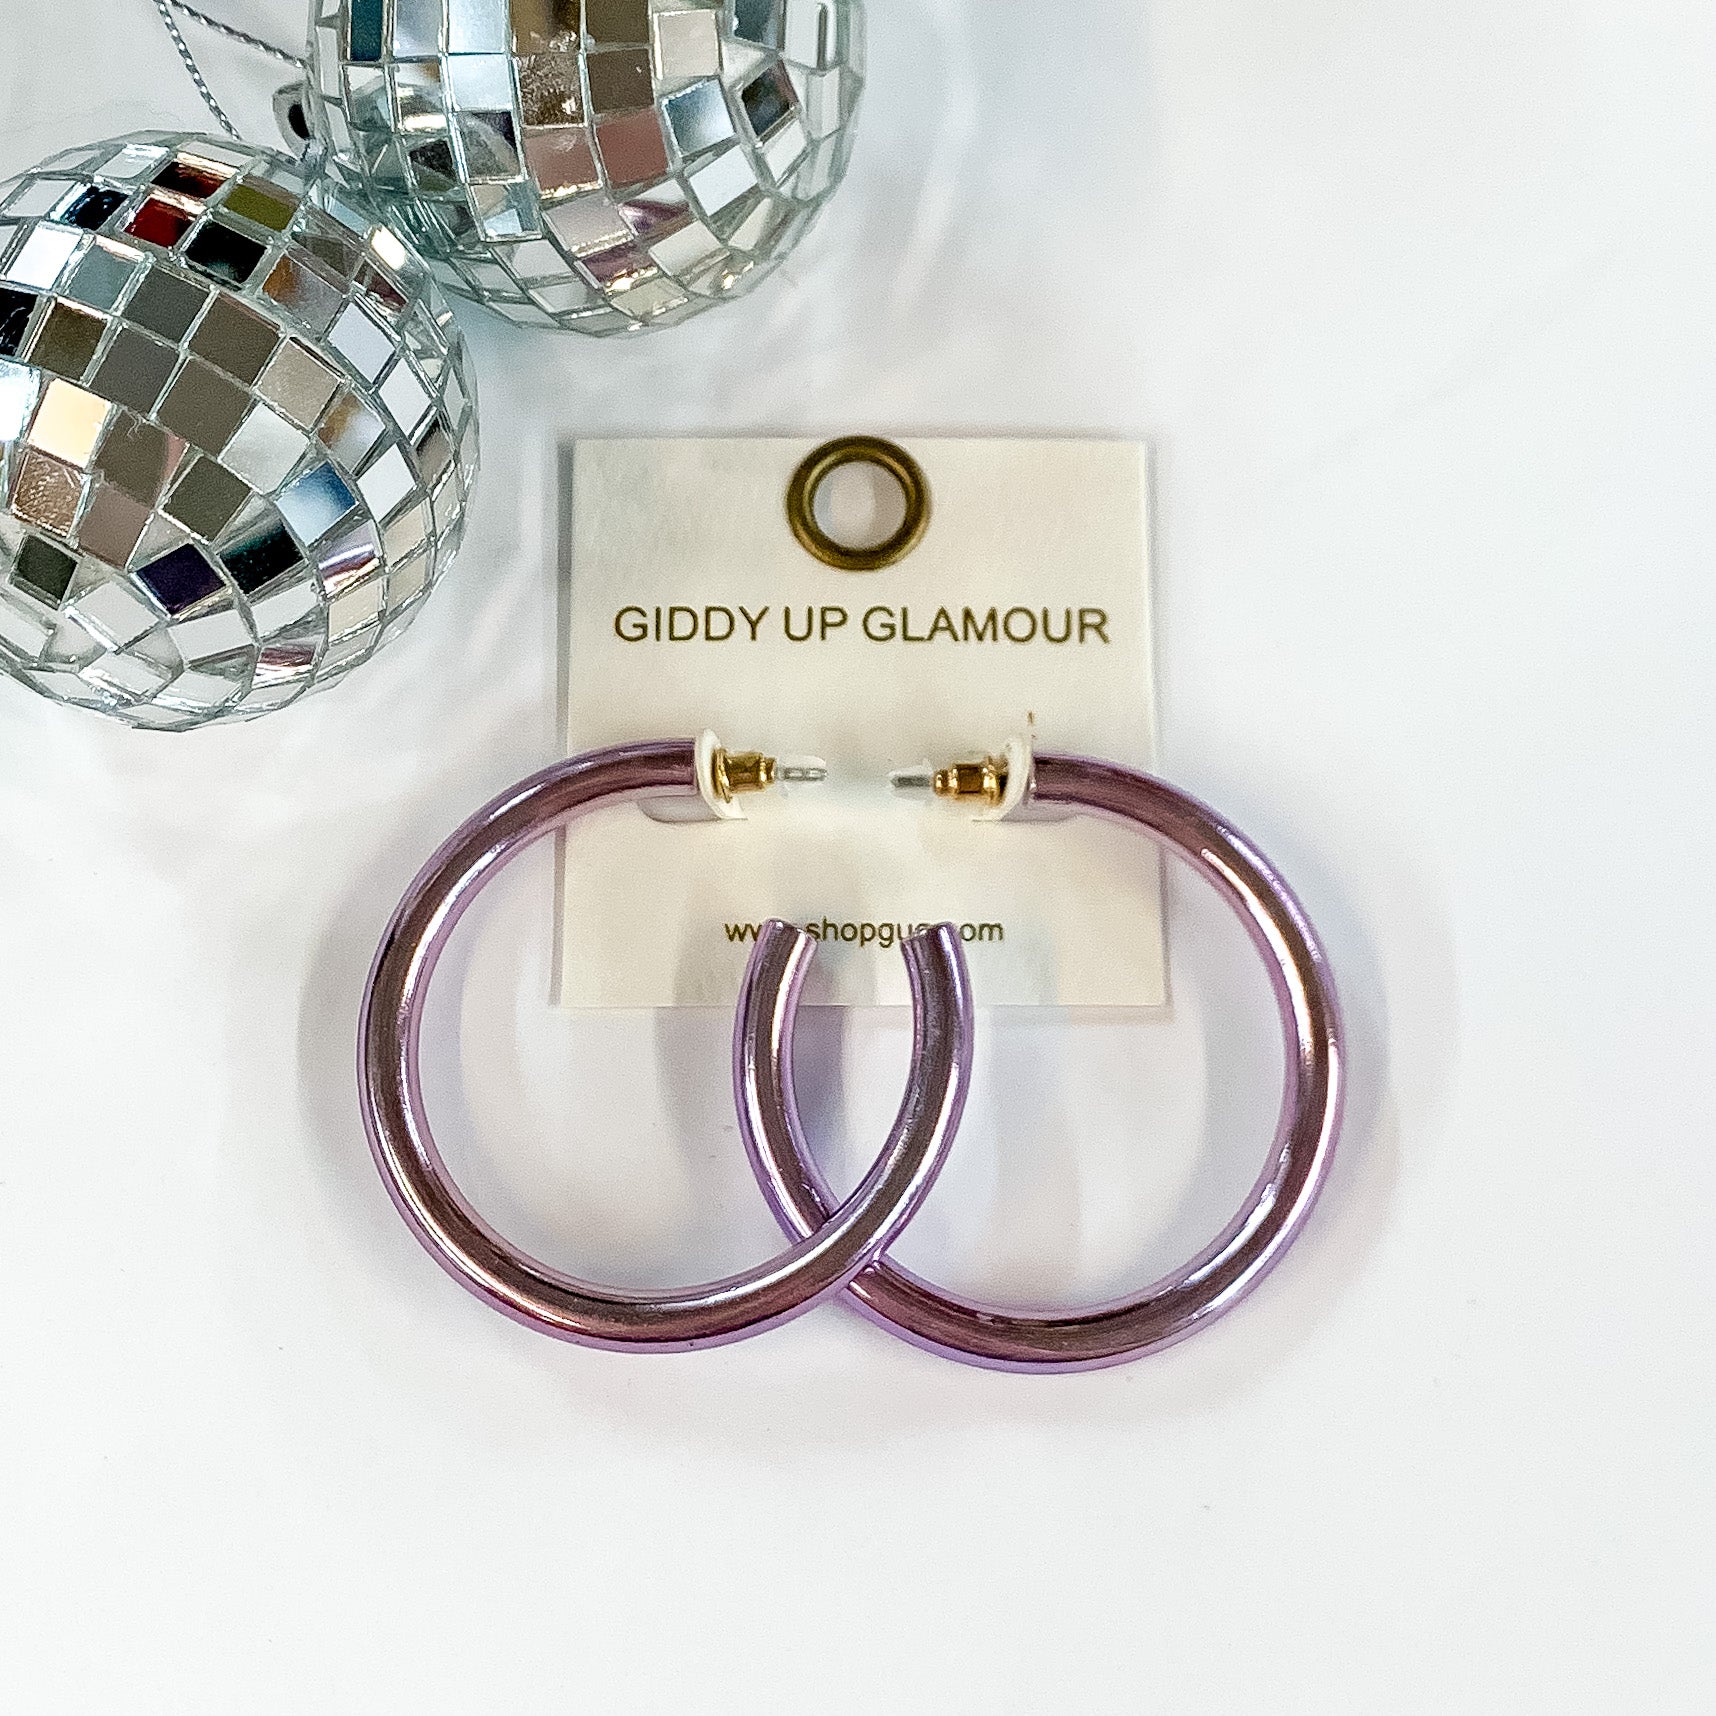 Light Up Large Neon Hoop Earrings In Lavender. Pictured on a white background with disco balls in the top left corner.